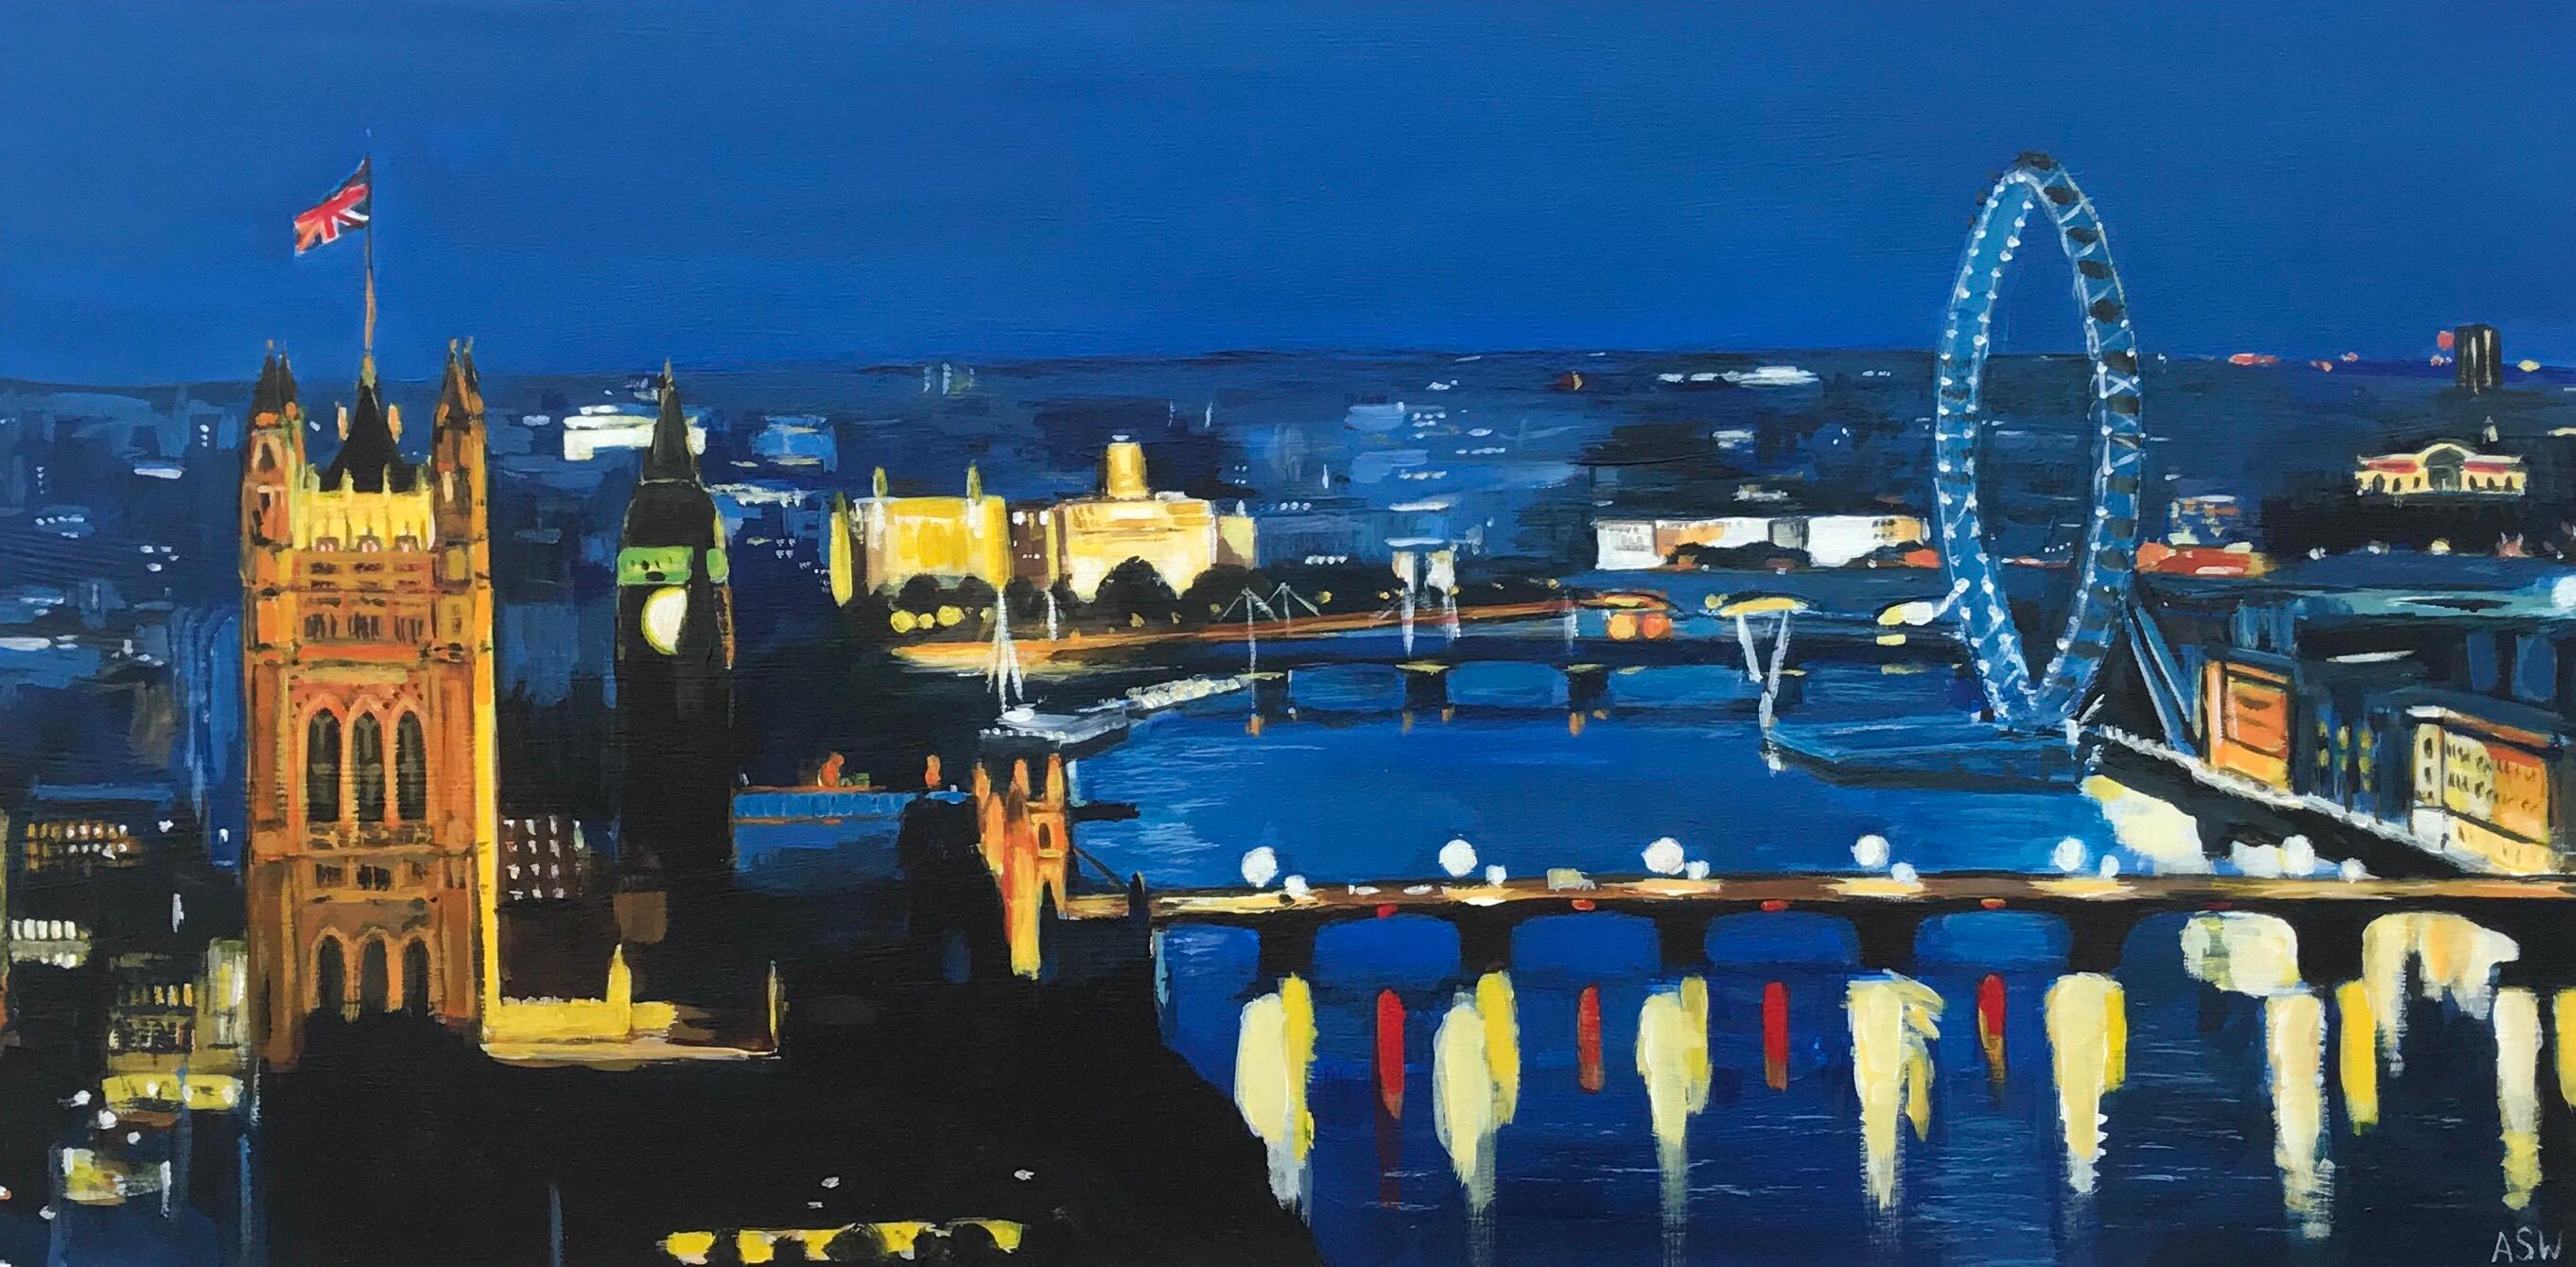 Unique Original Painting of the City of London River Thames at Night with Big Ben, Westminster, by British Urban Landscape Artist, Angela Wakefield. Thames, London by Night No.4 is part of Angela's London Collection.

Art measures 24 x 12